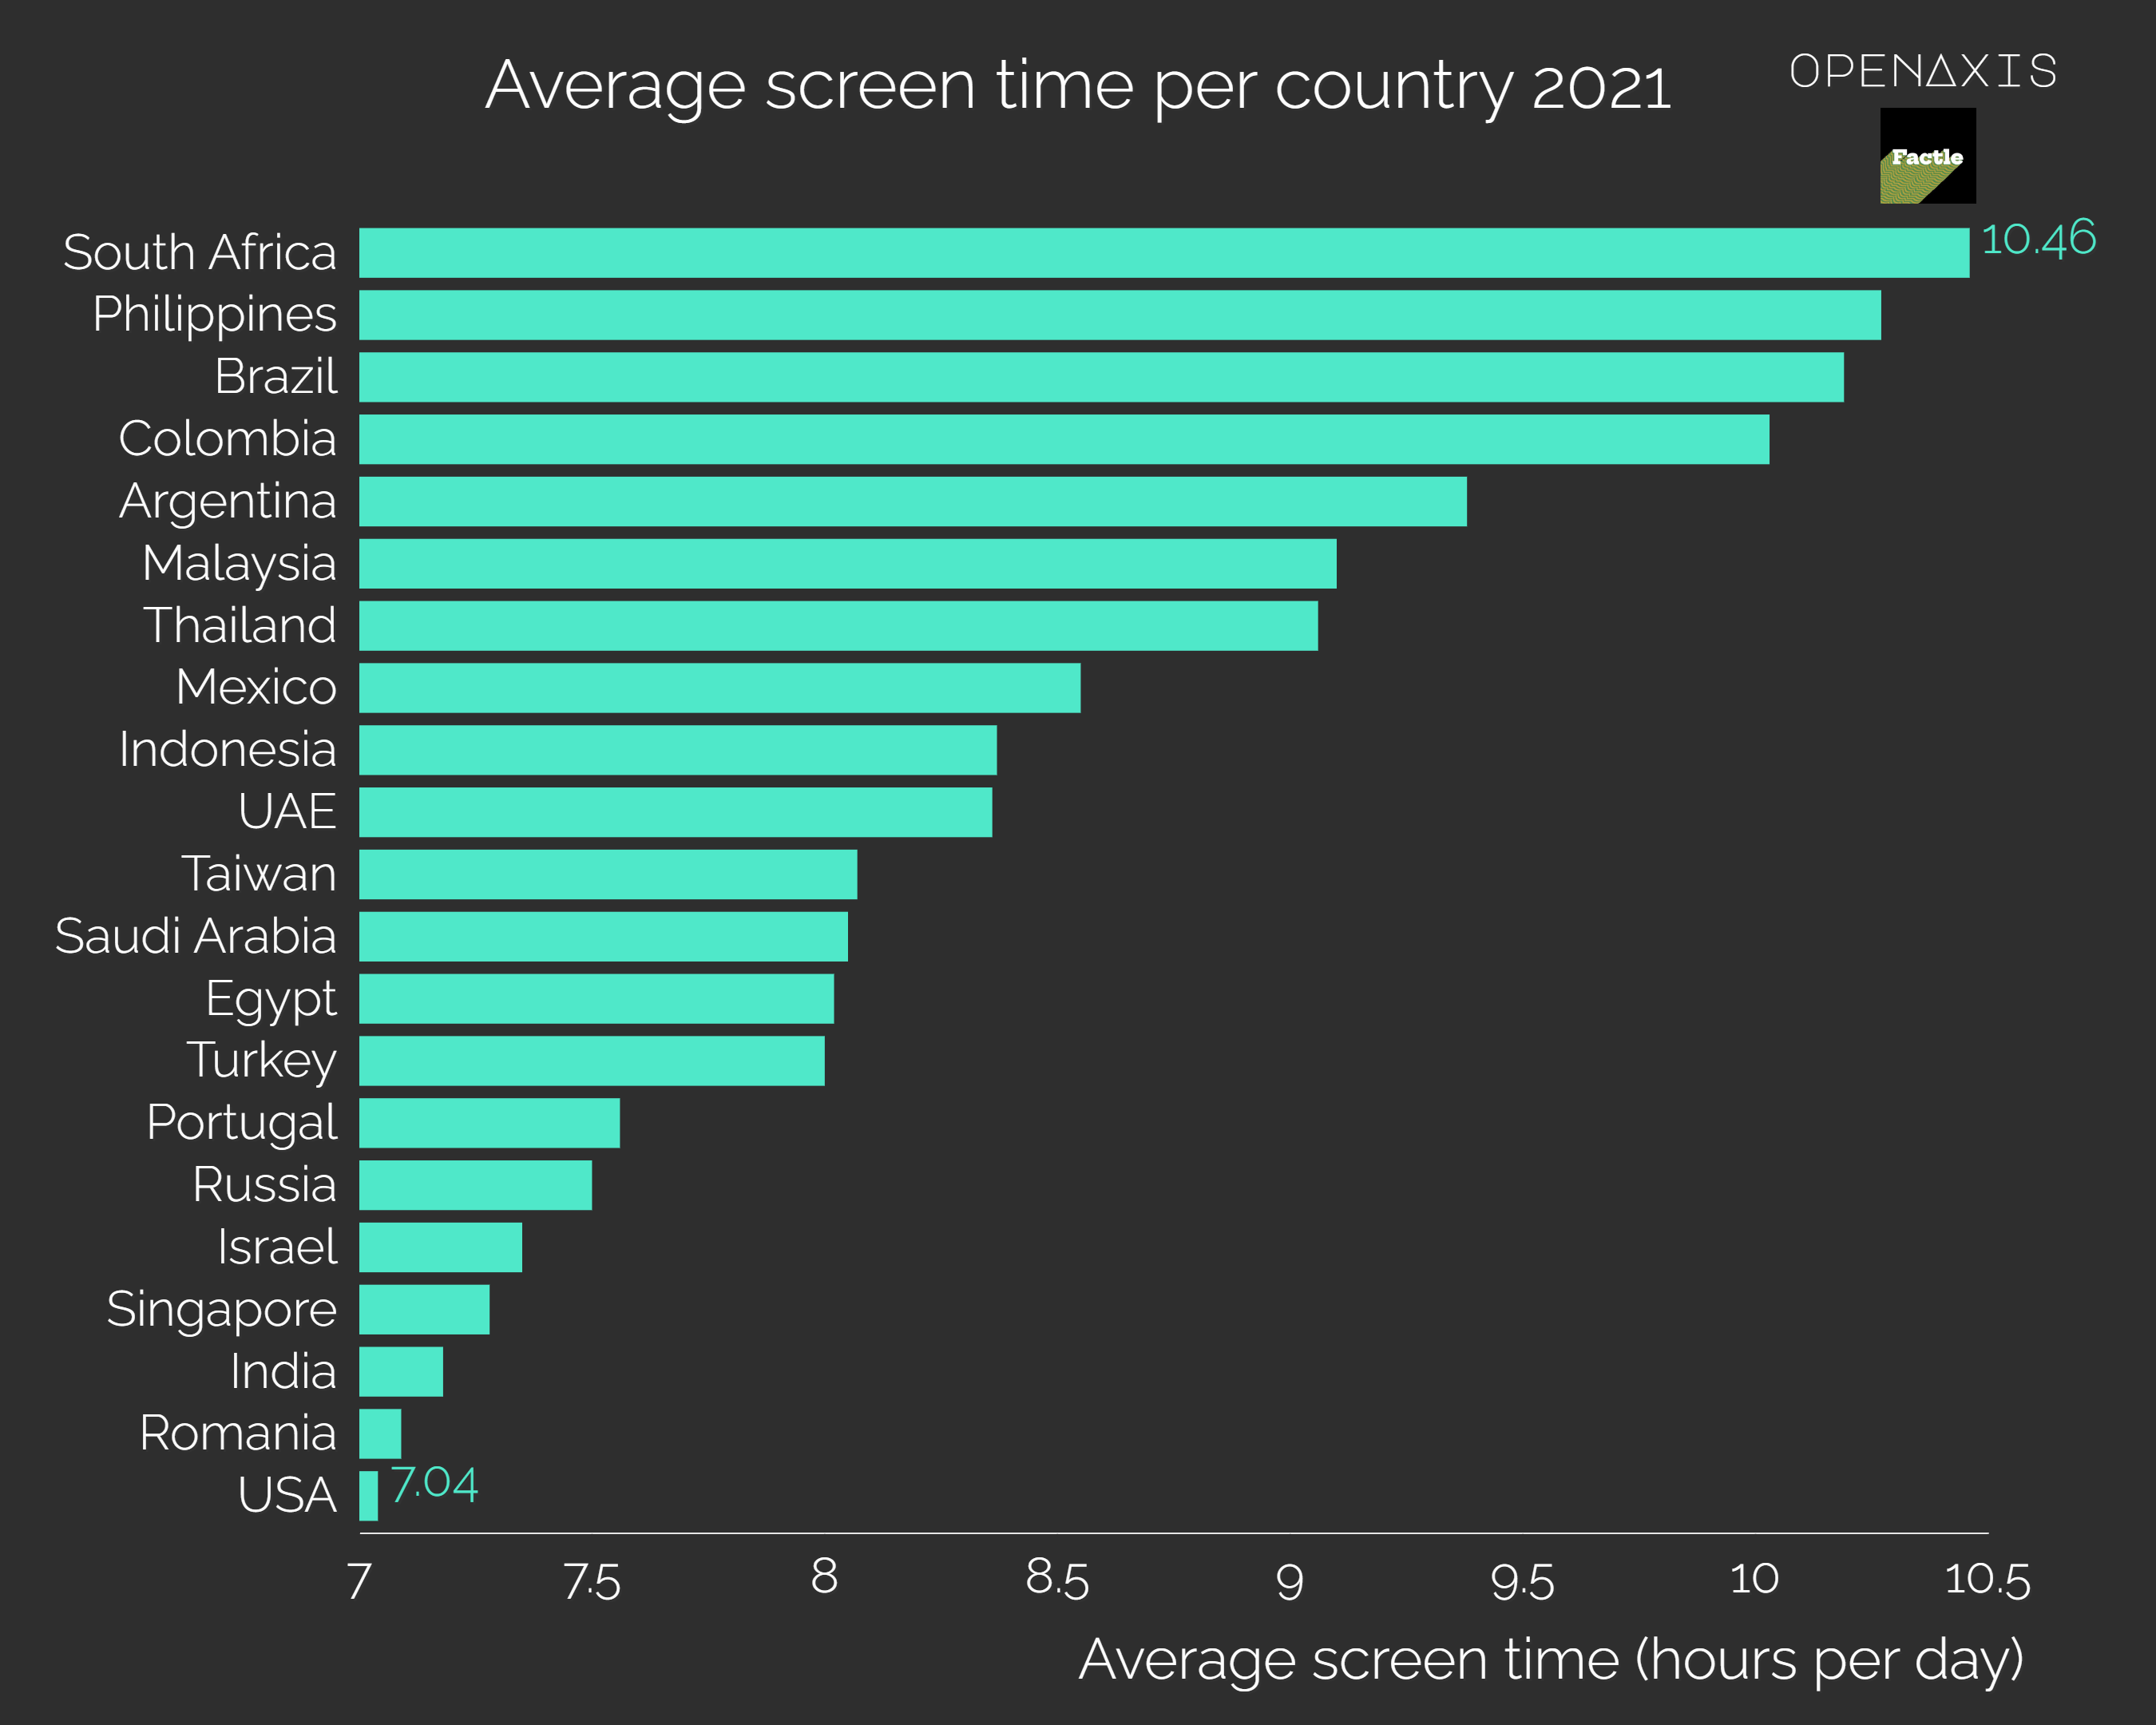 "Average screen time per country 2021"